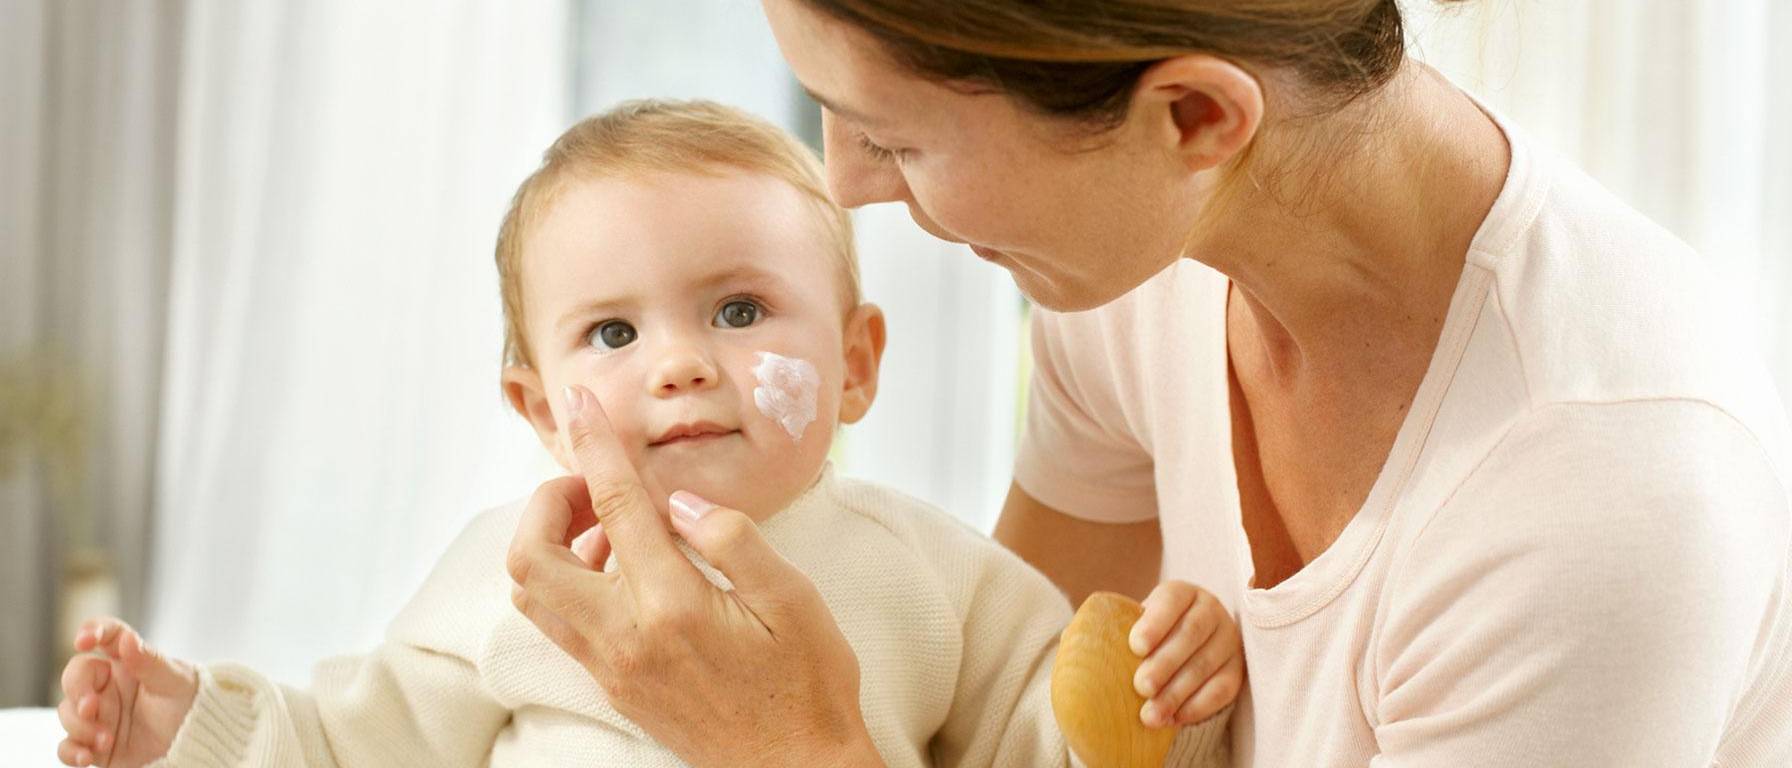 Mommy applies face cream on baby